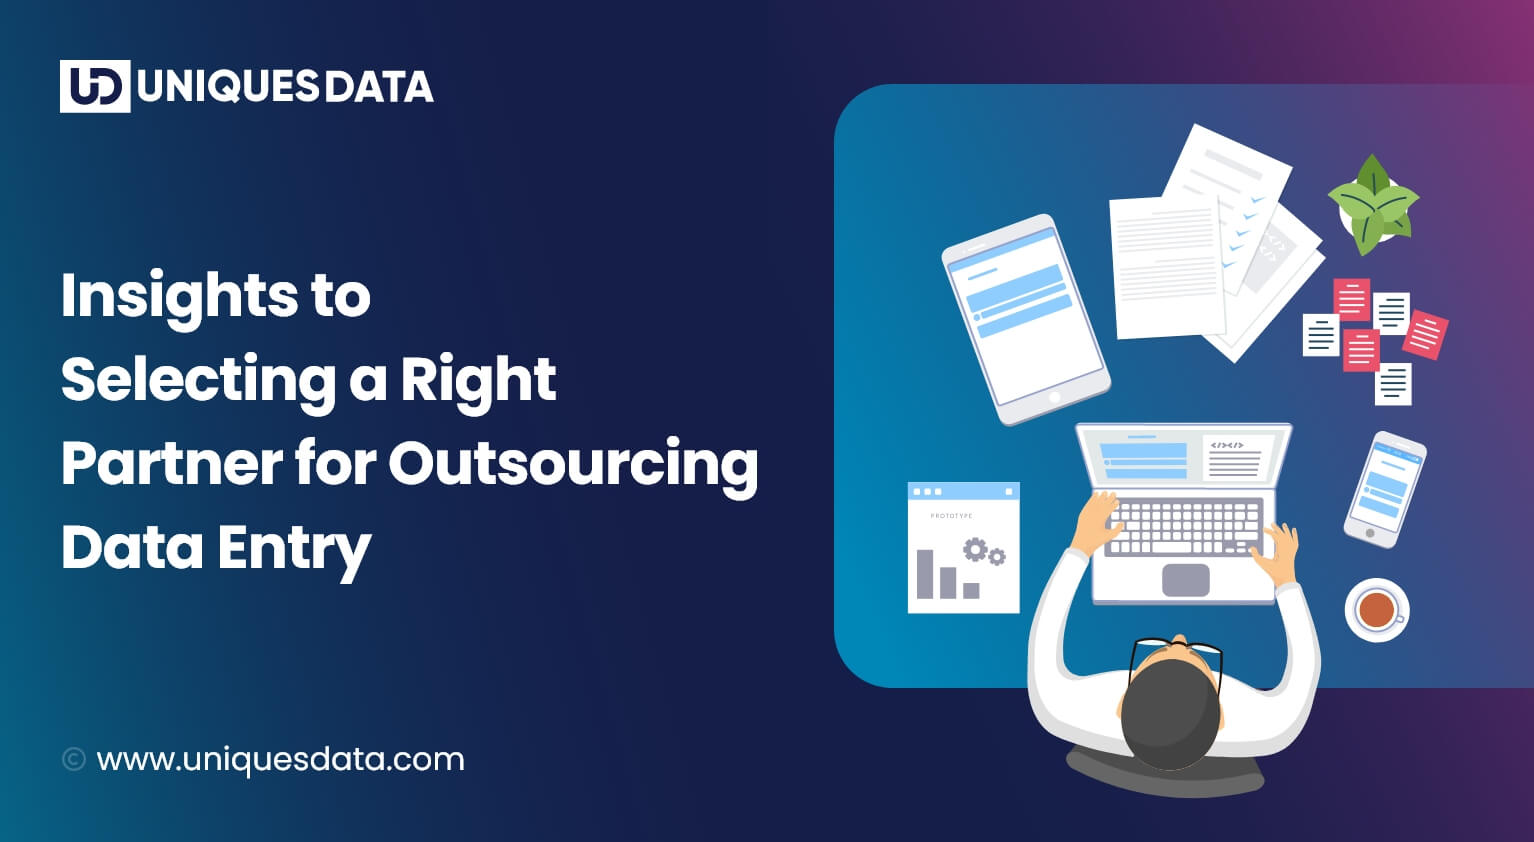 Insights to Selecting a Right Partner for Outsourcing Data Entry